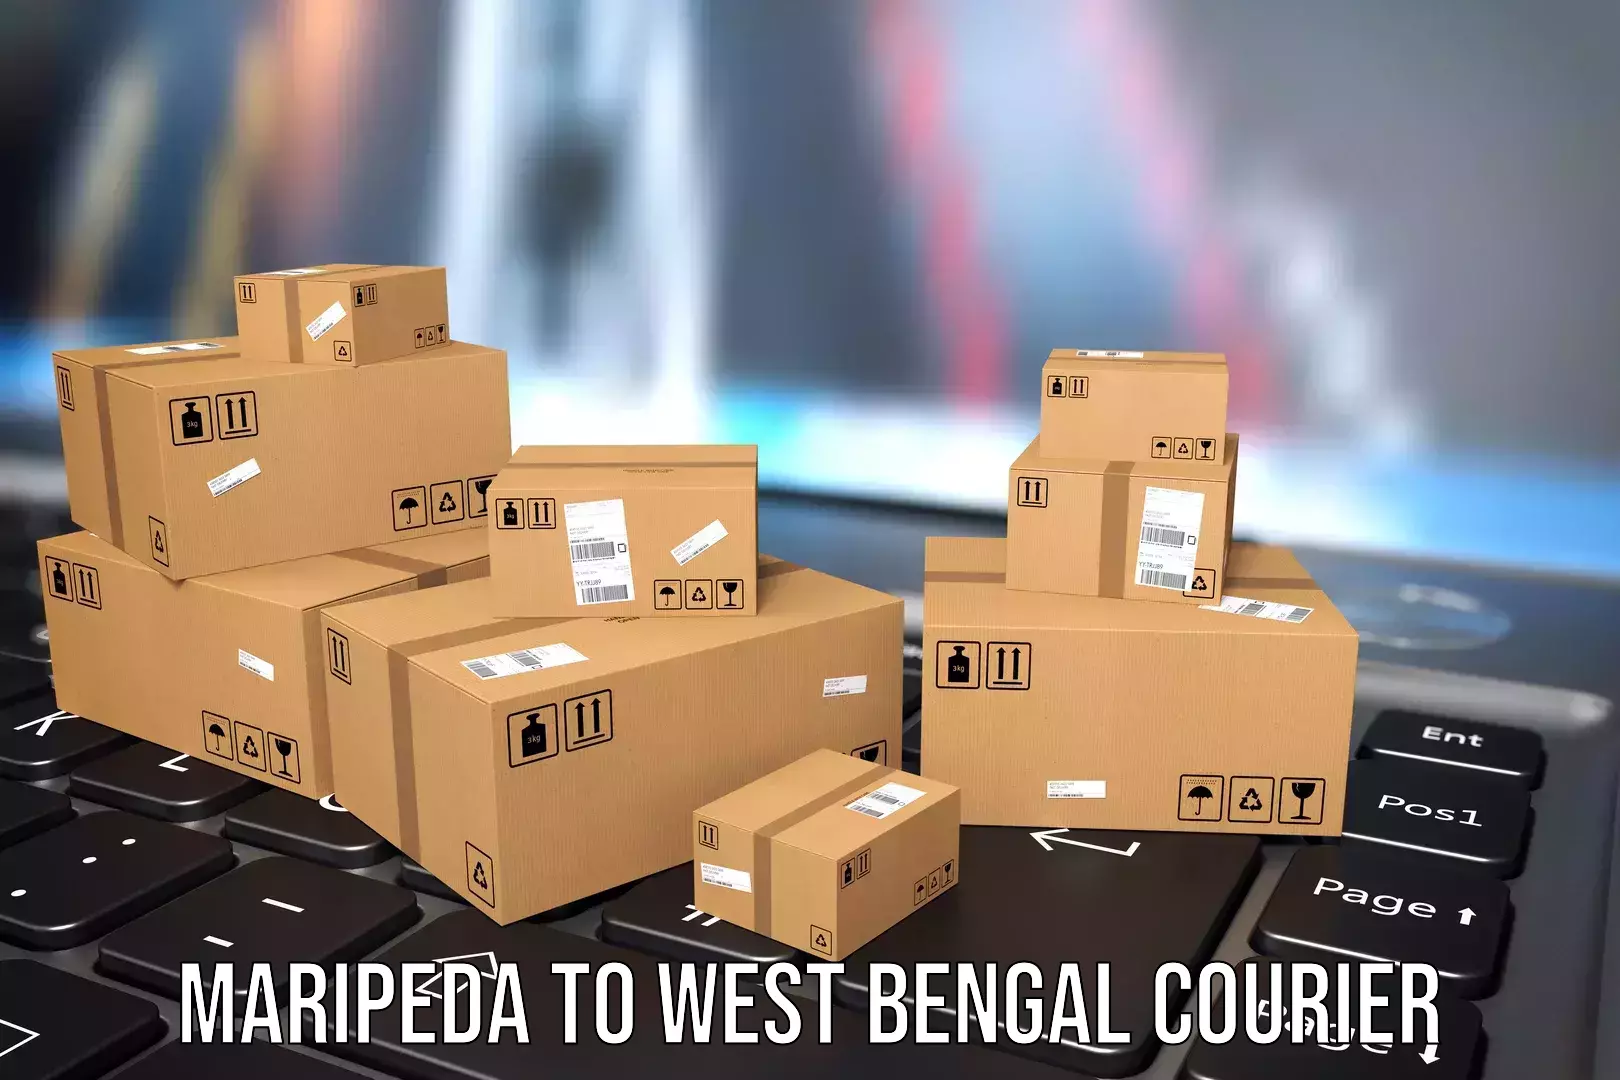 Luggage shipment specialists Maripeda to West Bengal